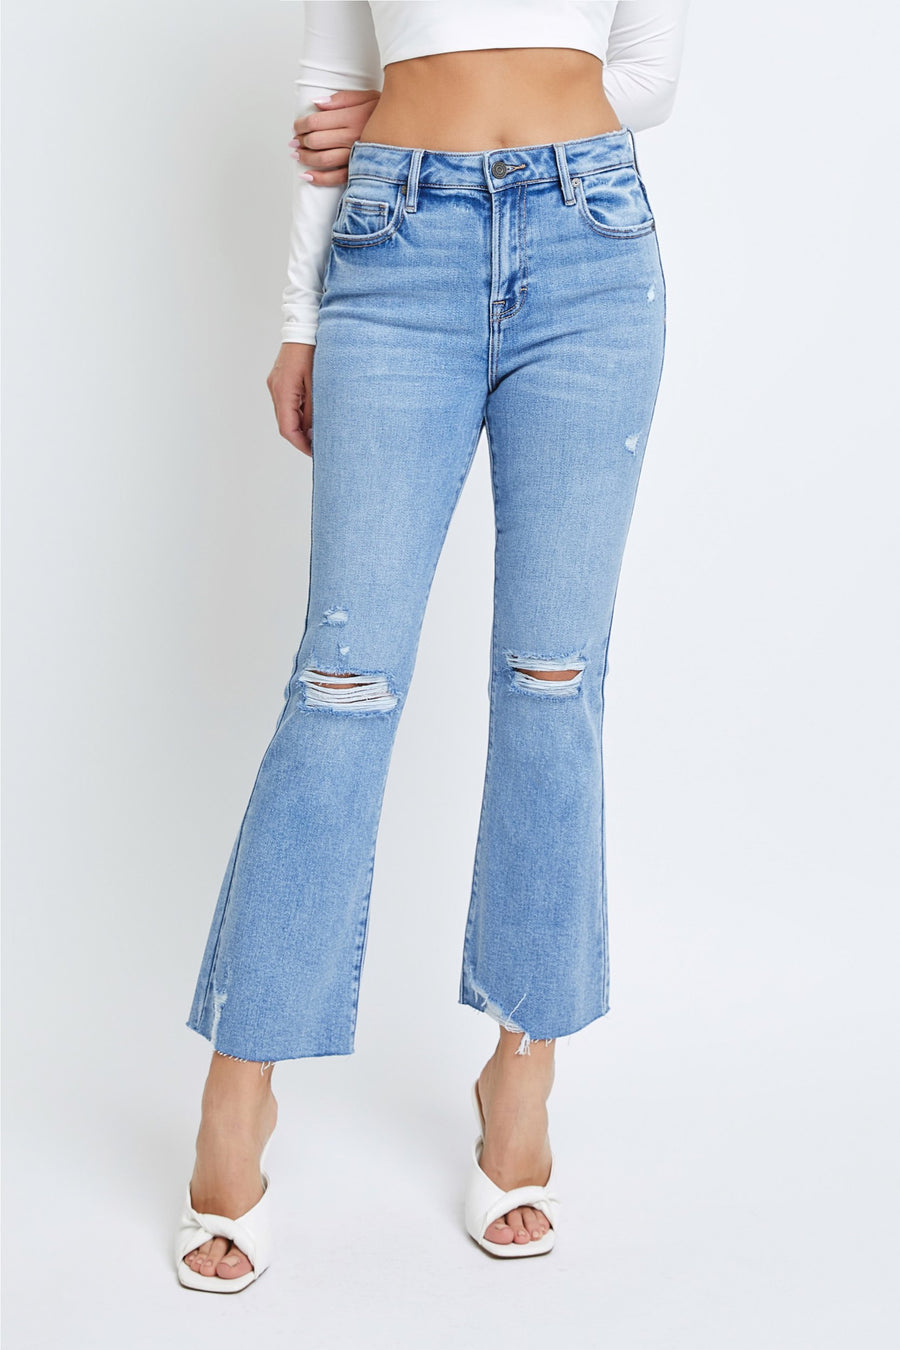 [HAPPI] LIGHT WASH DISTRESSED CLEAN CUT CROPPED FLARE